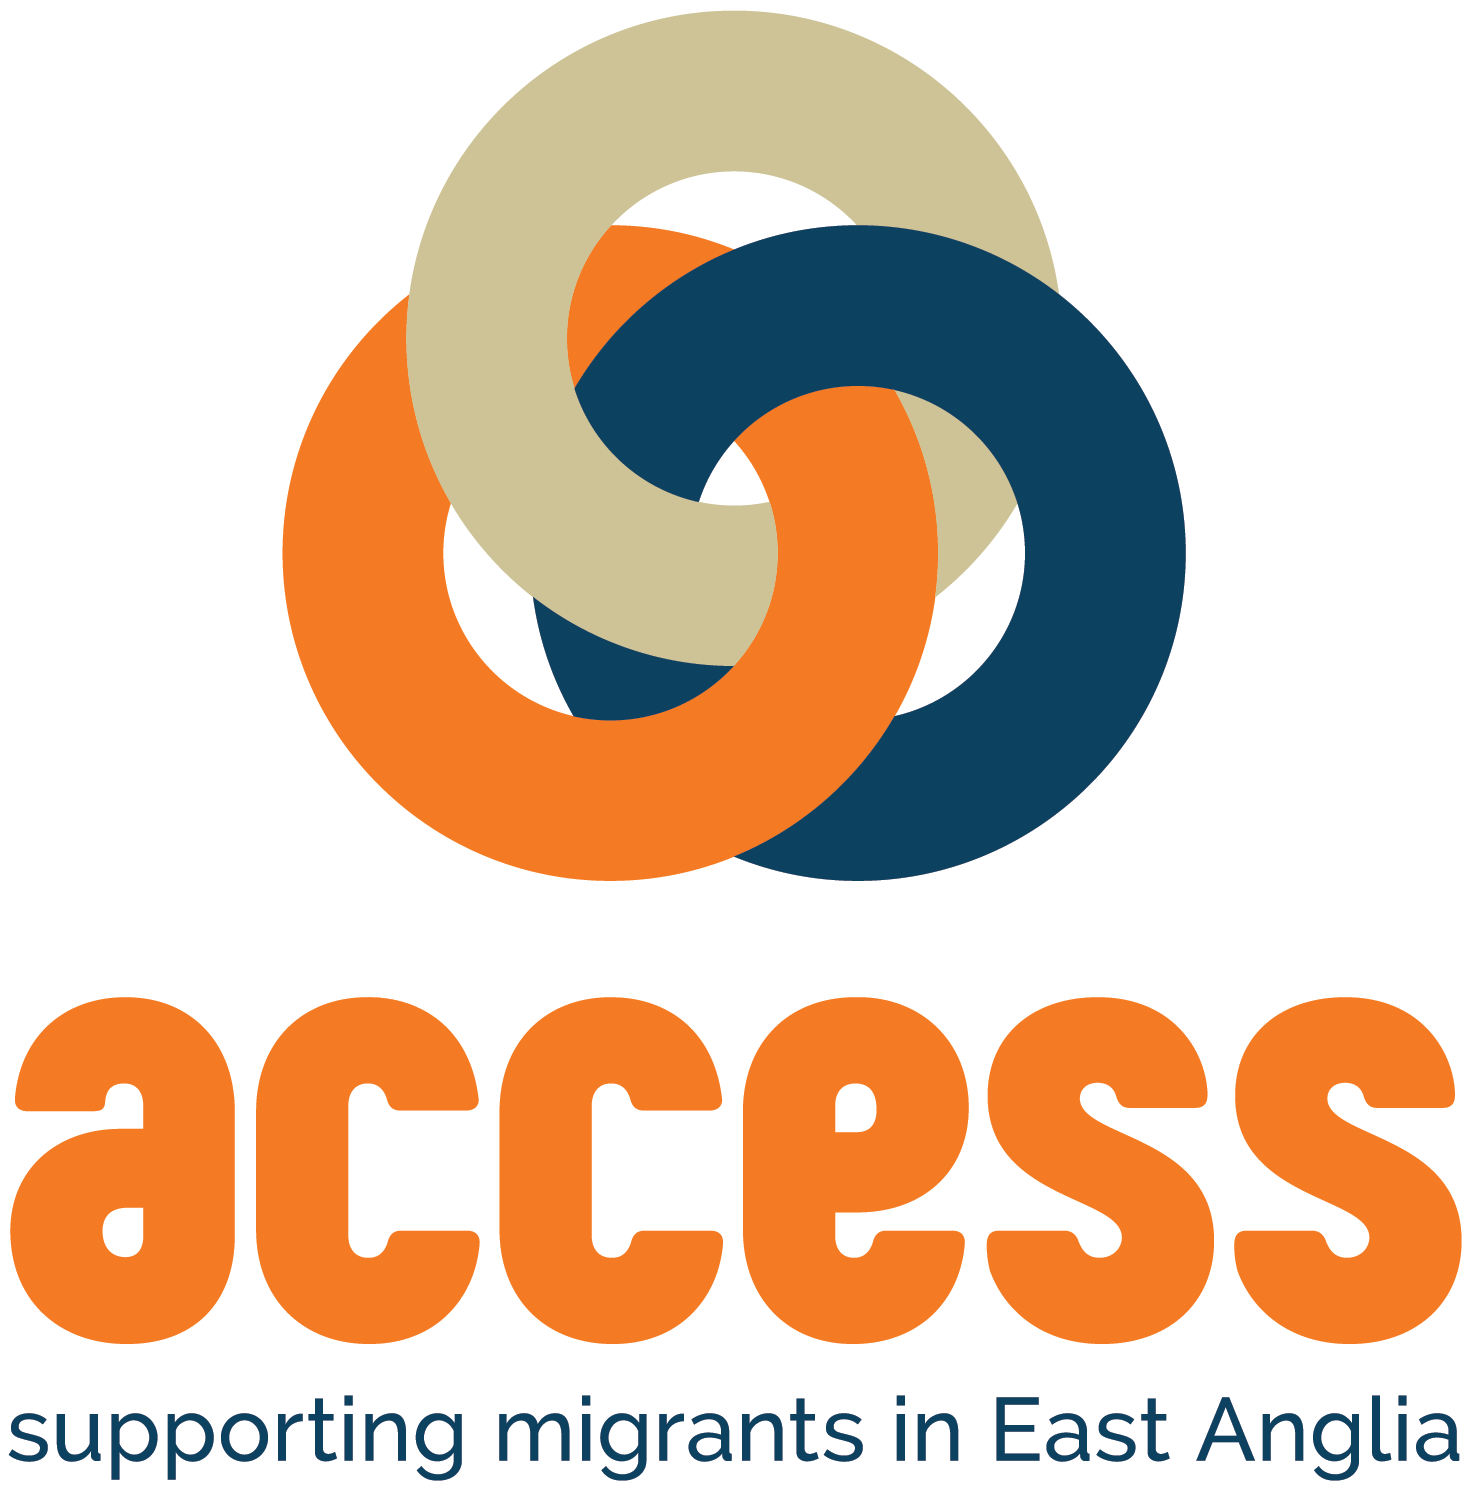 ACCESS - ACCESS exists to help migrants settle into their local communities. We work in partnership with stakeholders to promote community cohesion, to offer multi-lingual advice services and to provide practical support to overcome language barriers for our clients.